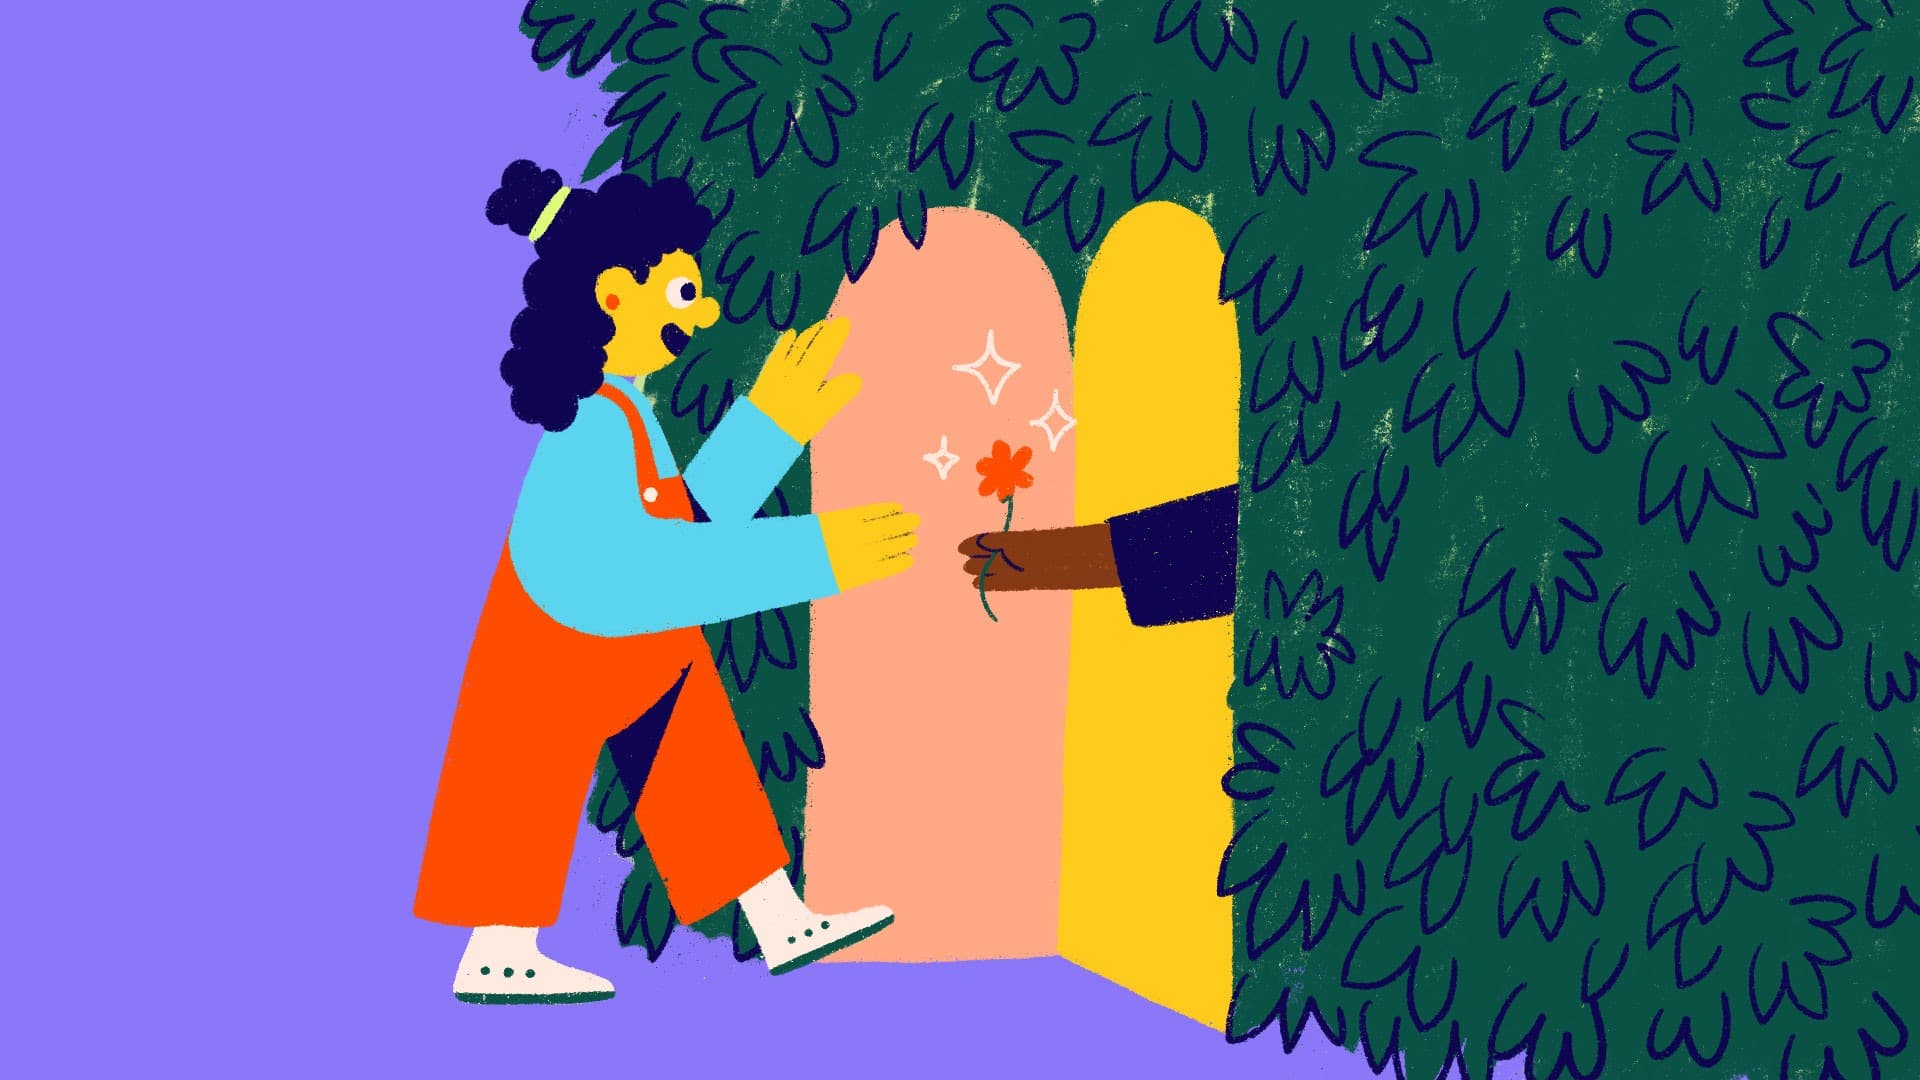 A colorful illustration shows a person with black curly hair and glasses, dressed in a blue shirt and orange overalls, happily receiving a red flower from another person whose hand extends through an arched doorway hidden in a lush green tree.